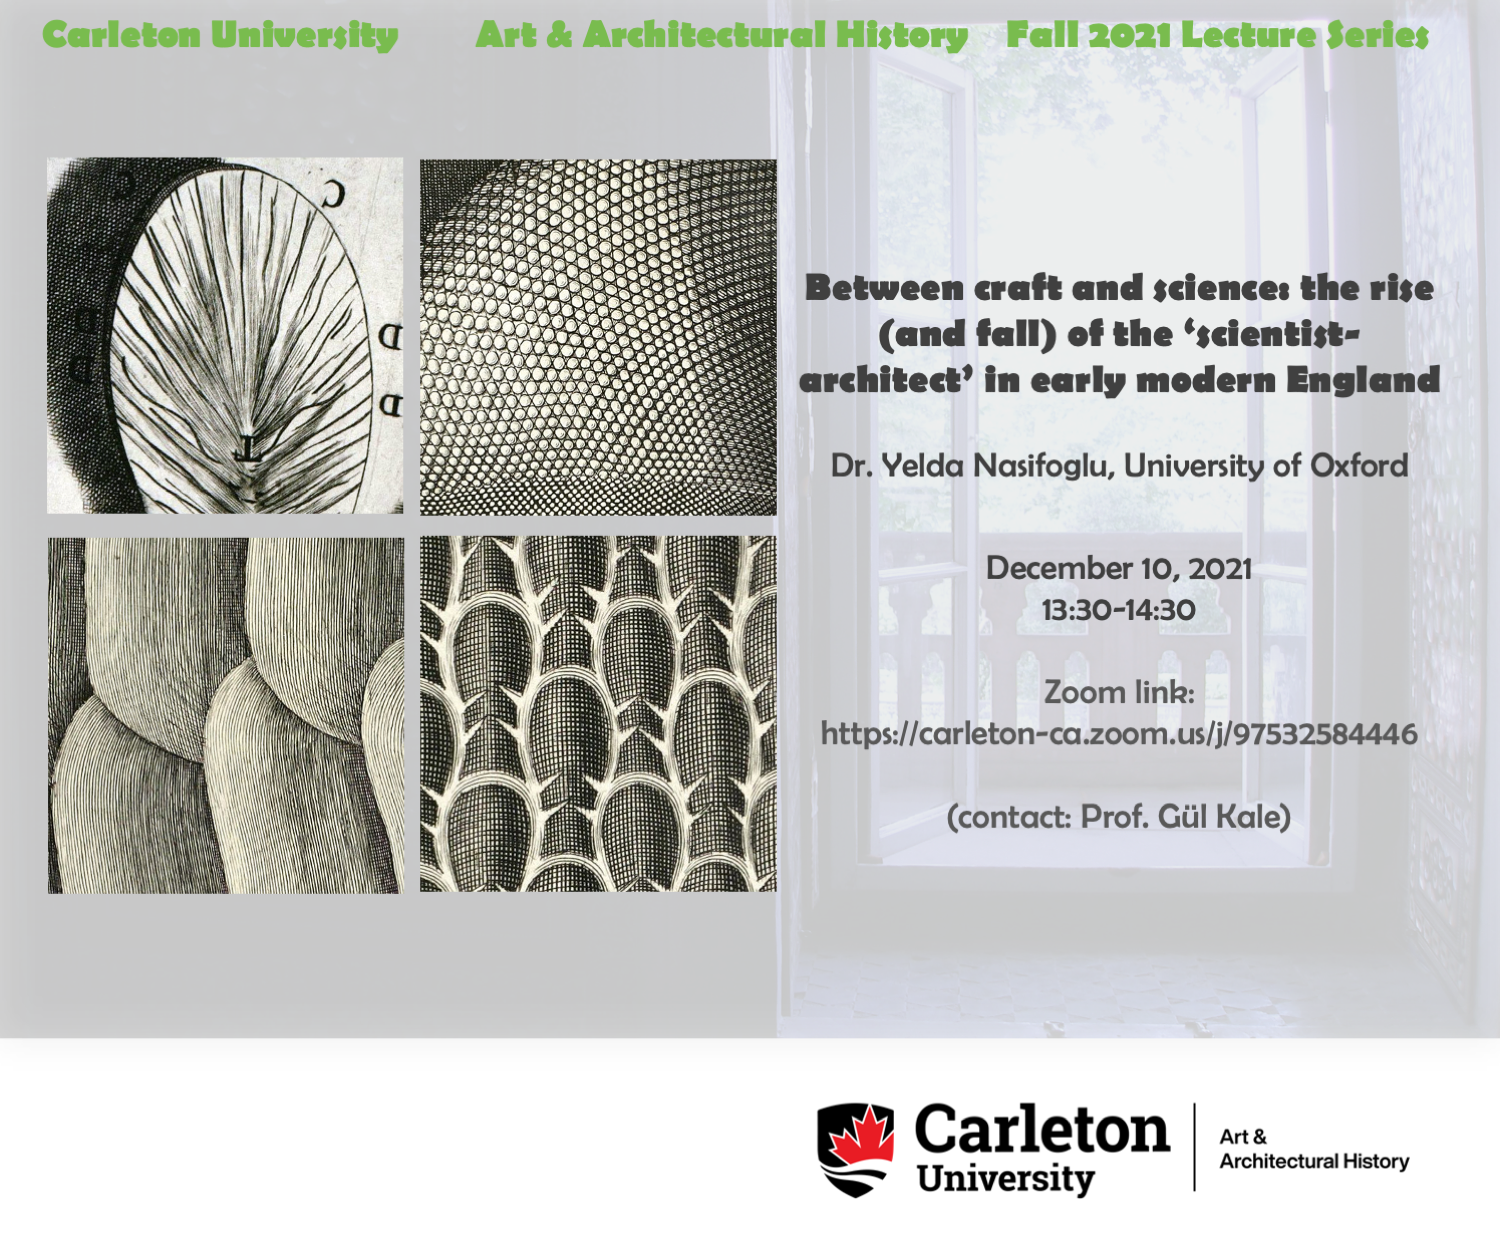 Poster for AHH Lecture Series Event - December 10, 2